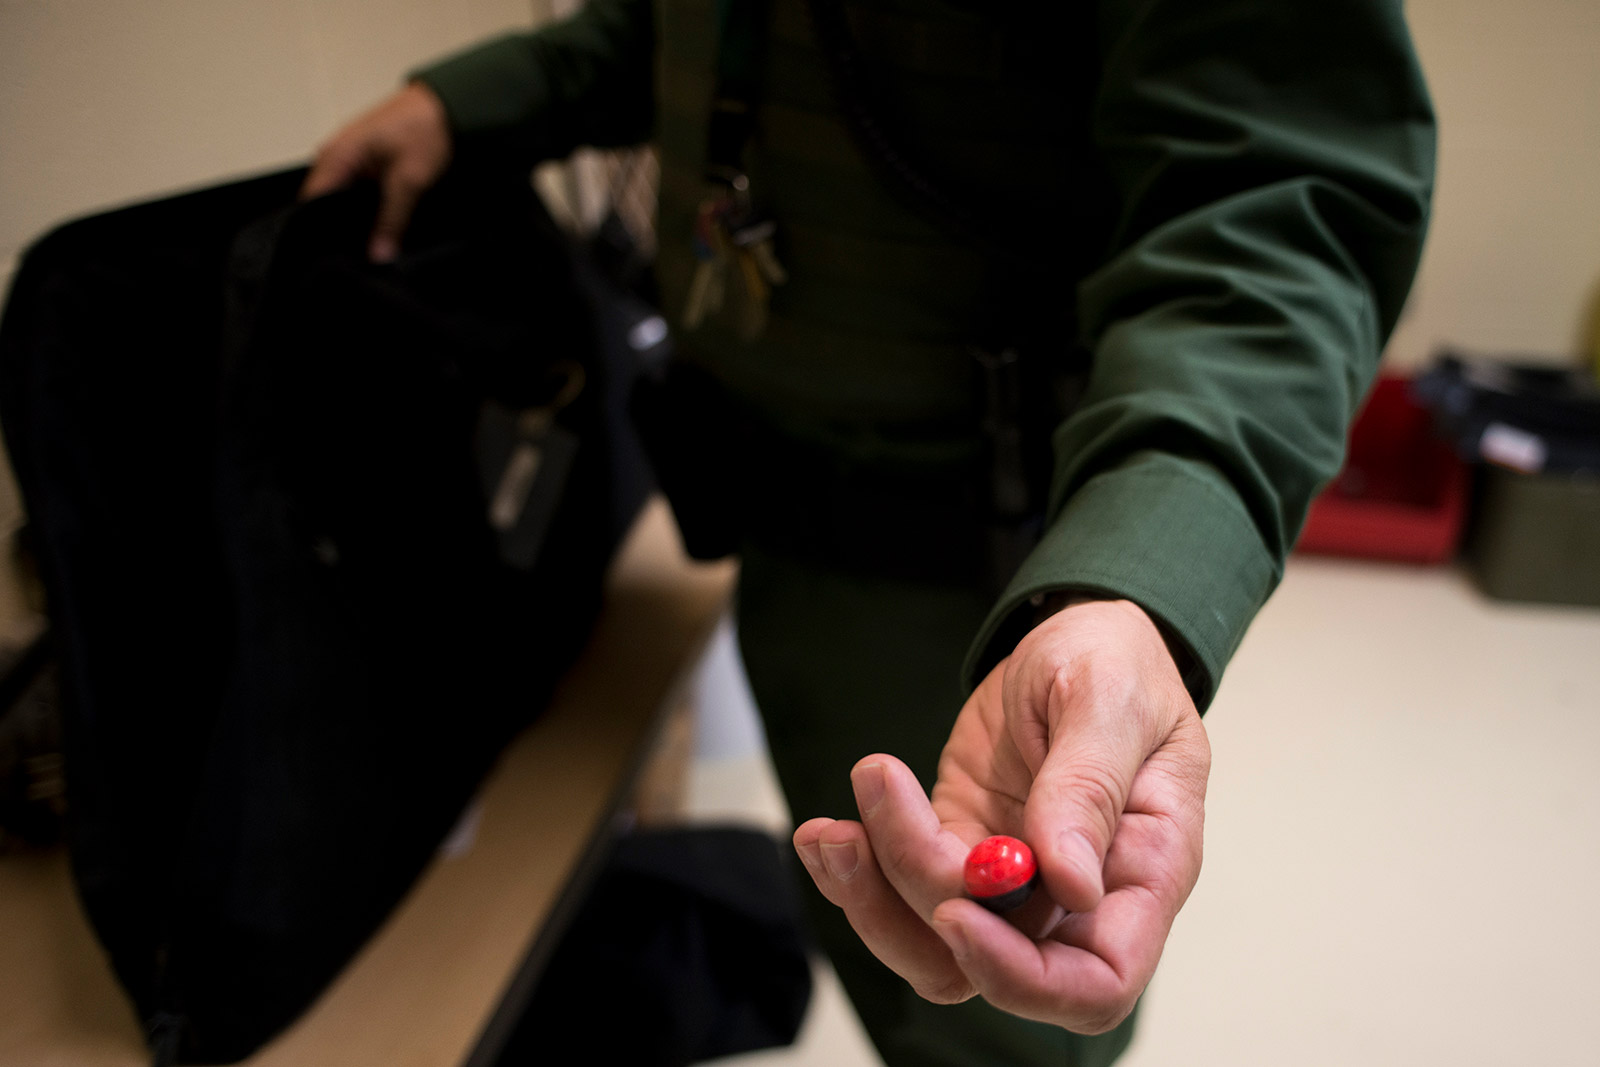 Border Patrol agent Joshua Wilson on Sept. 5, 2017, holds a pepperball, a nonlethal deterrent agents can use while patrolling the U.S.-Mexico border. <em>(Brandon Quester/inewsource)</em>